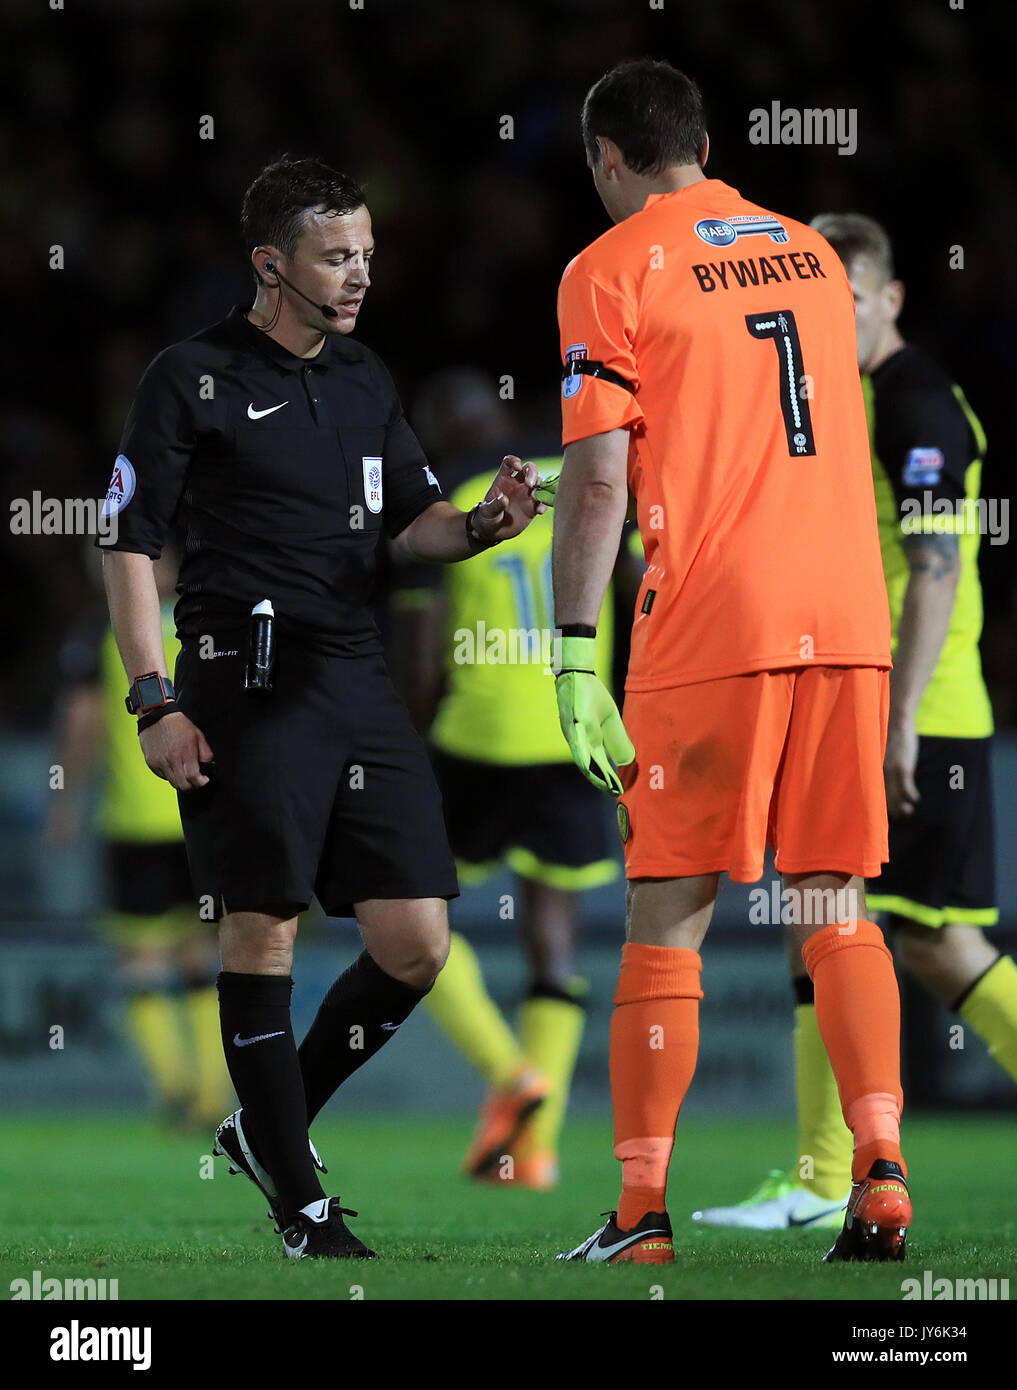 Burton Albion goalkeeper Stephen Bywater hands referee Tony Harrington an object thrown by a member of the crowd during the Sky Bet Championship match at the Pirelli Stadium, Burton. Stock Photo